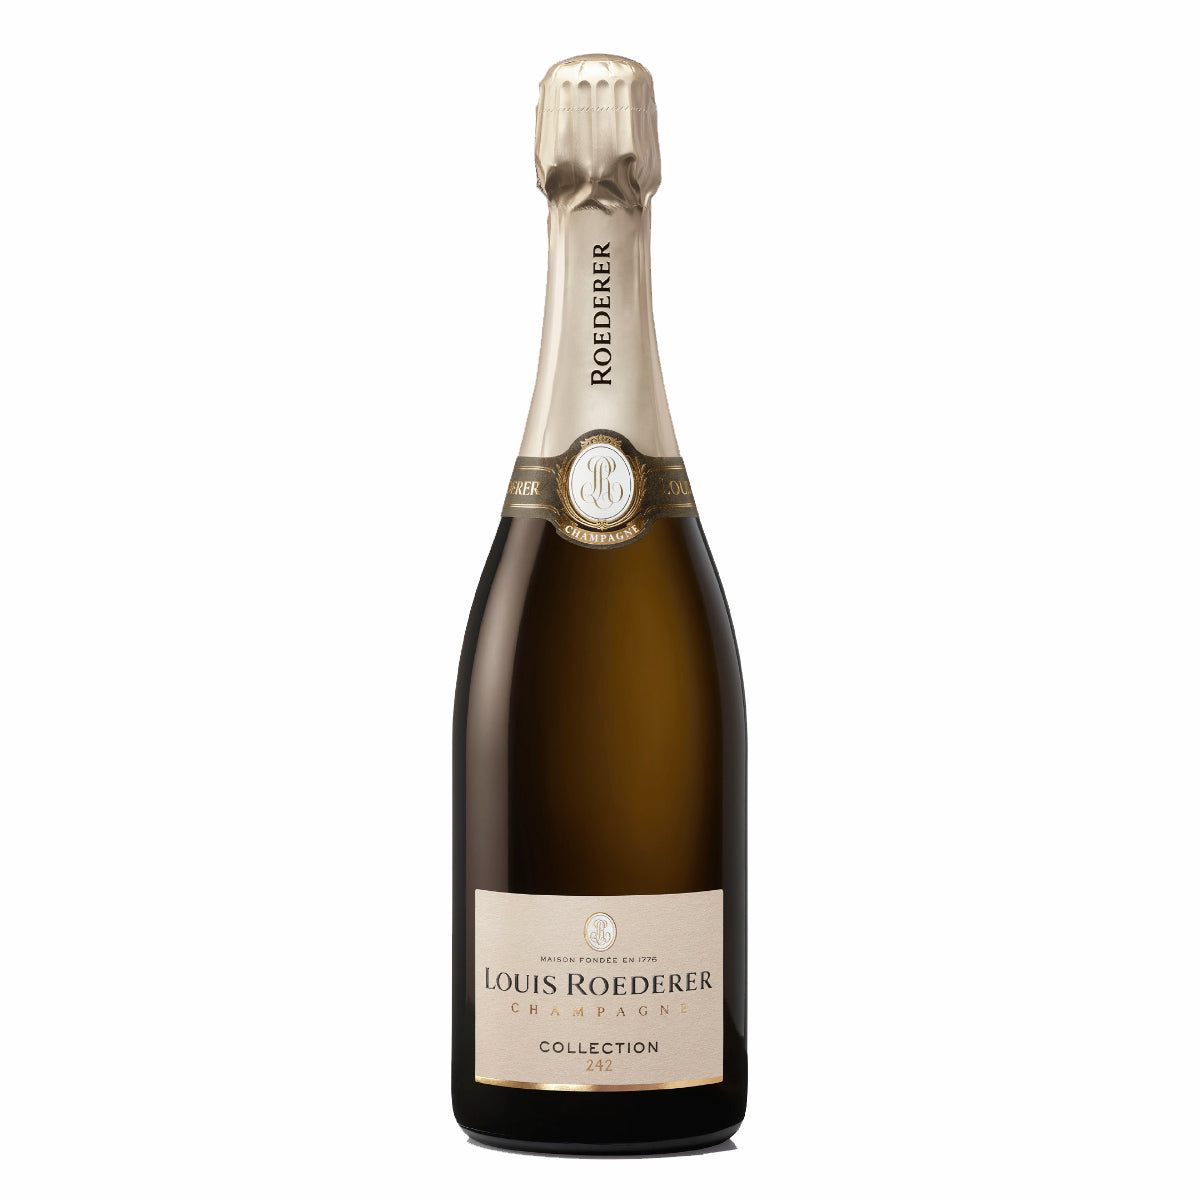 Louis Roederer Collection 242 Brut, Champagne, France